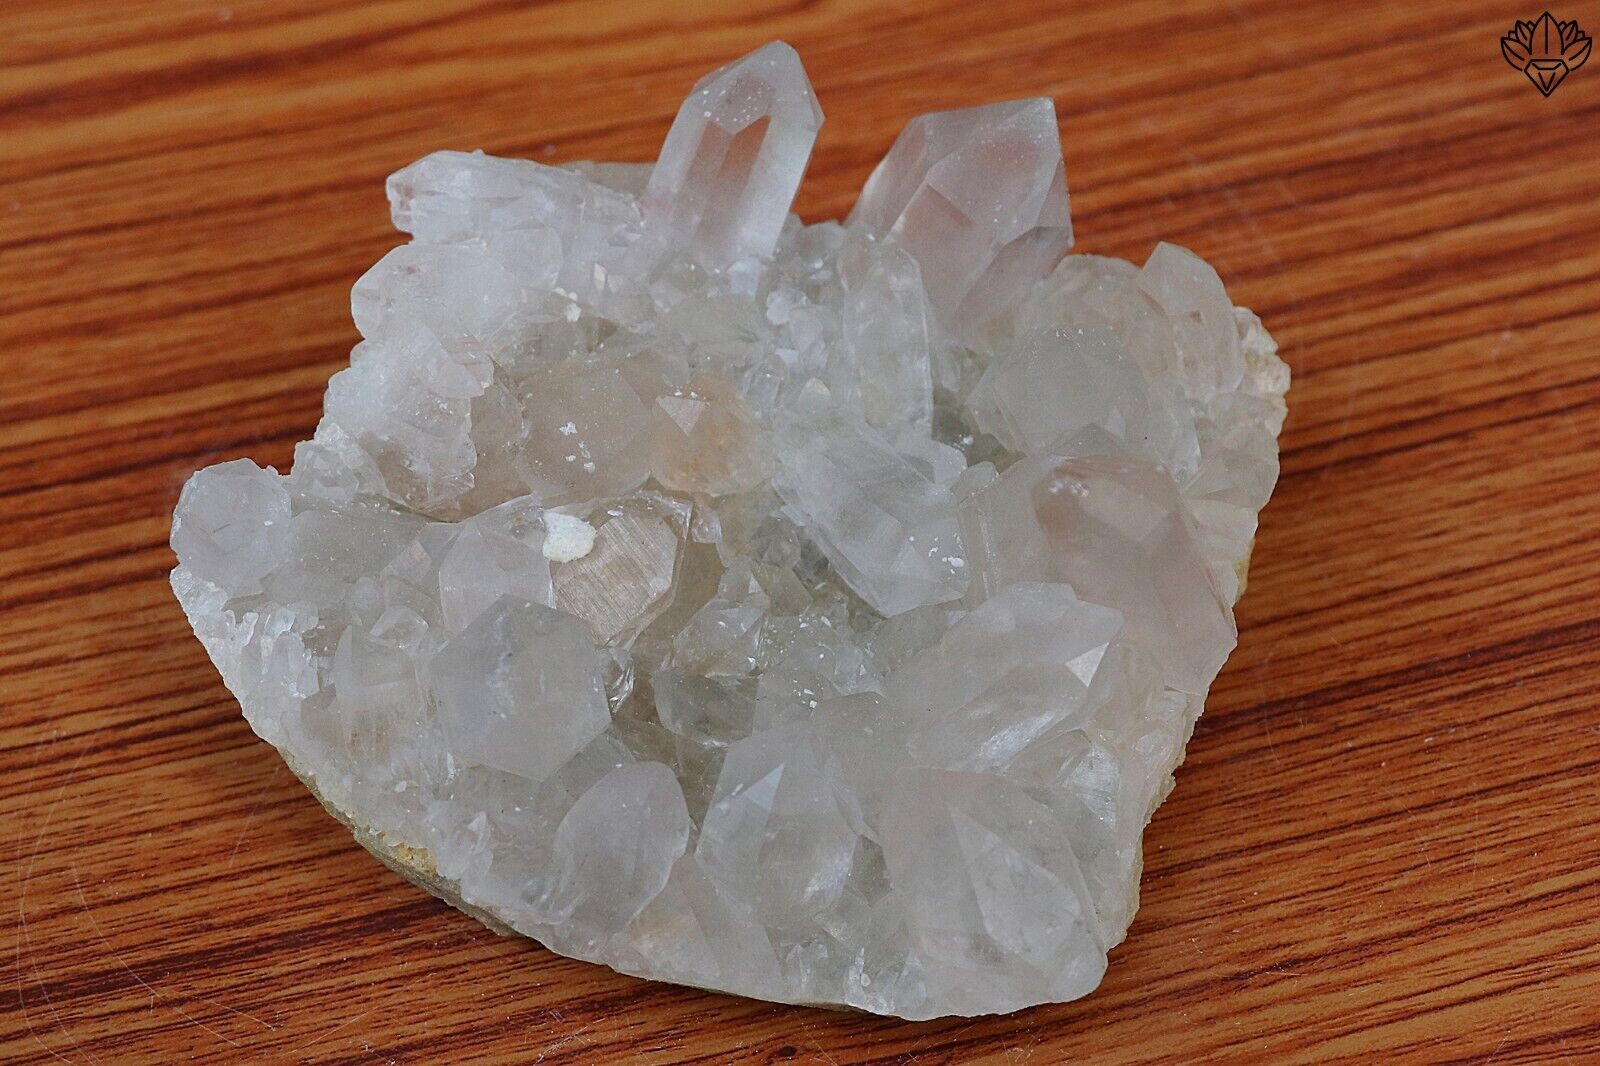 806 gm Healing Cluster Minerals Rough Stone White Himalayan Crystal Specimen Raw